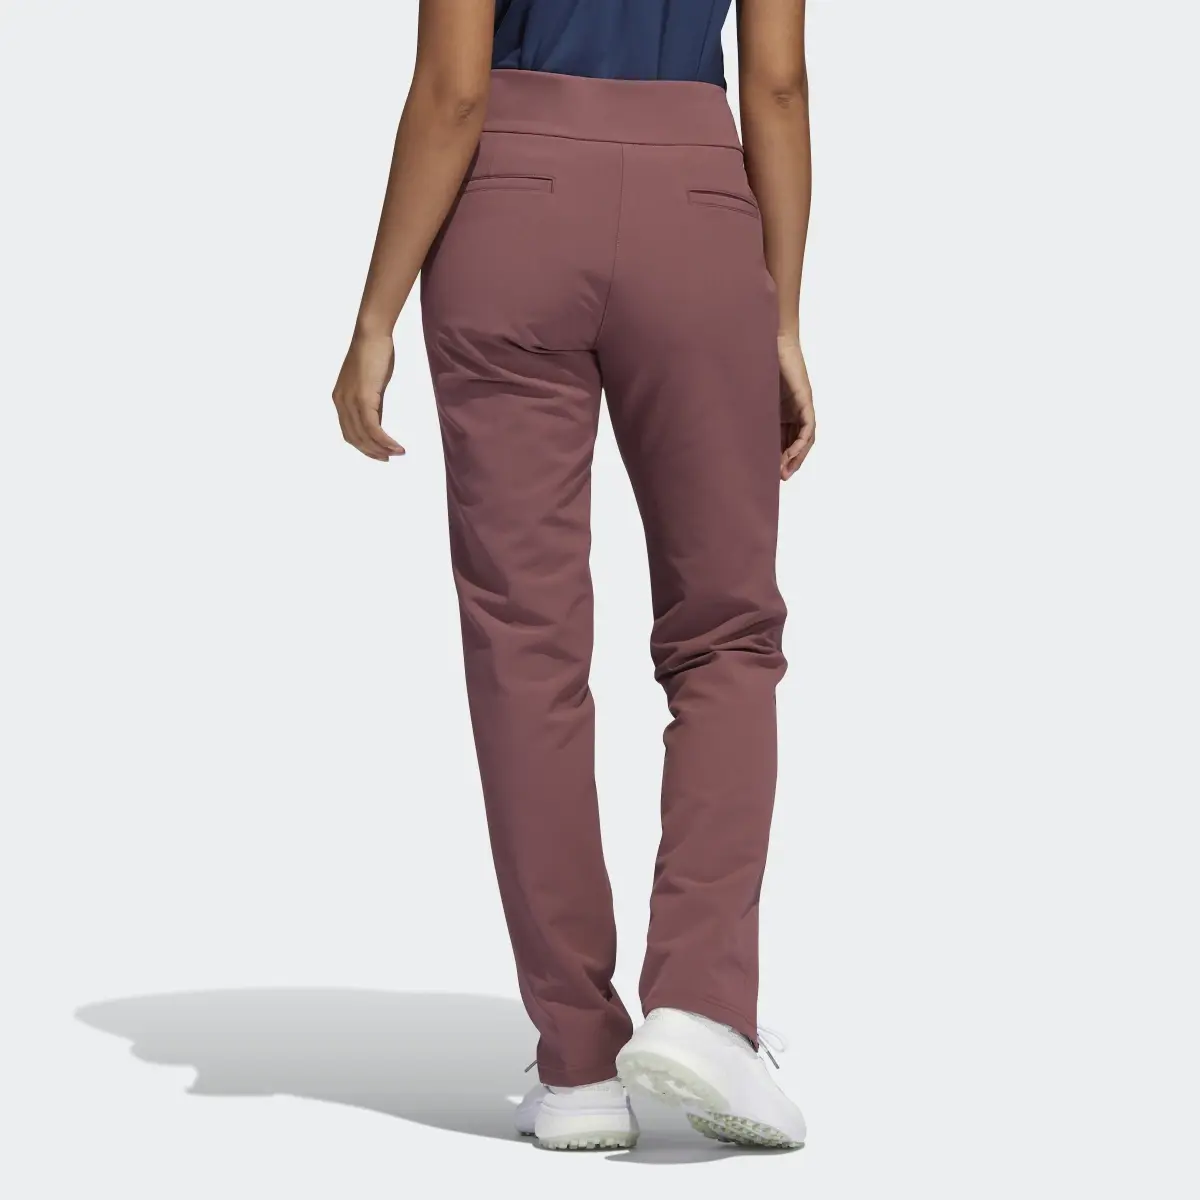 Adidas Winter Weight Pull-On Golf Pants. 2